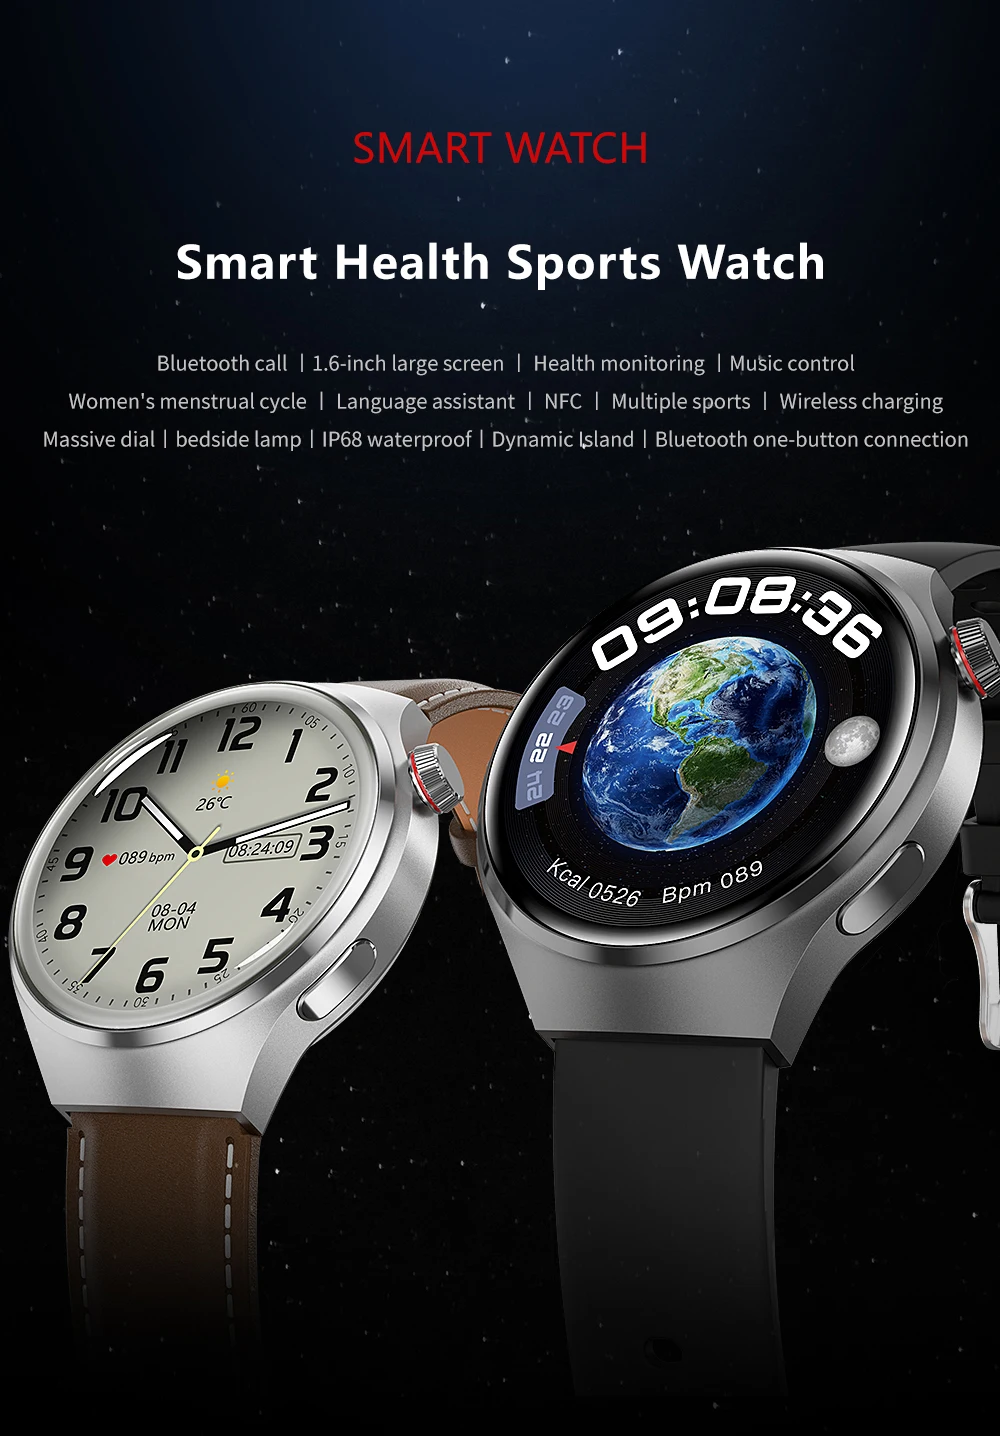 Lenovo GT4 Pro New Smart Watch Men AMOLED Outdoor Smartwatch With  Flashlight Sport Fitness Bracelet For Huawei Xiaomi All Phone